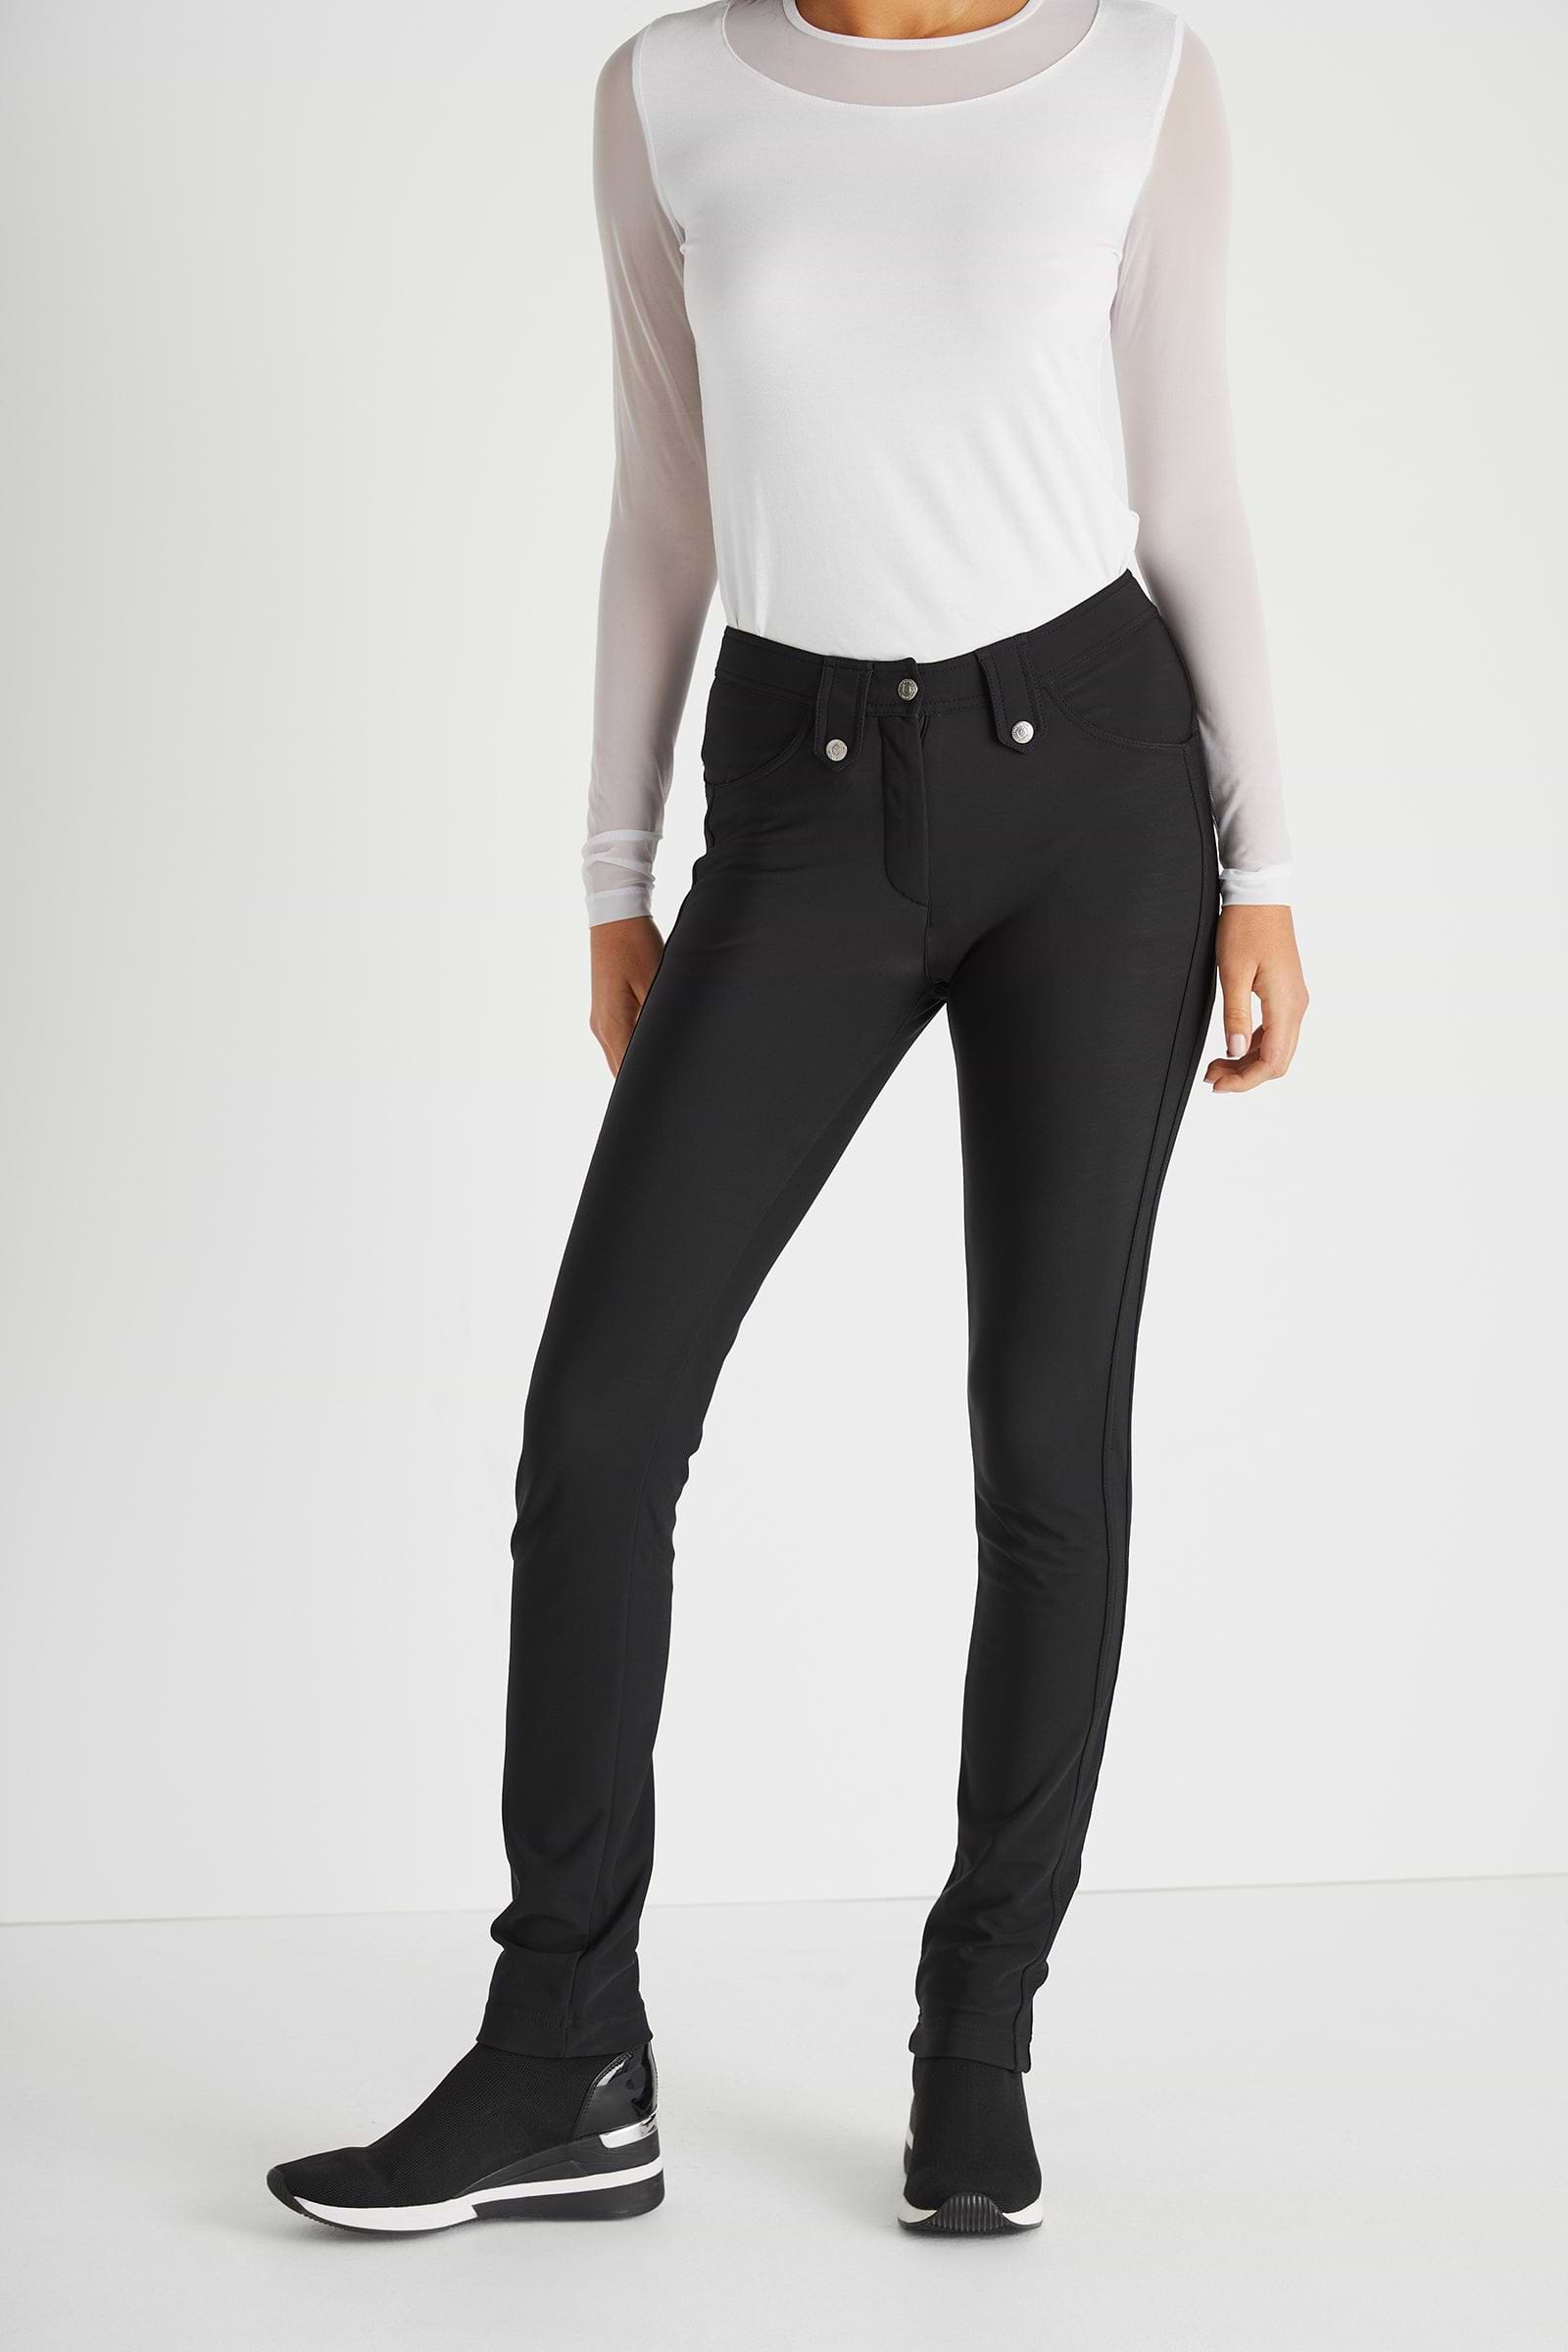 The Best Travel Pants. Front Profile of the Skyler Cozy Fleece-Lined Travel Pant in Black